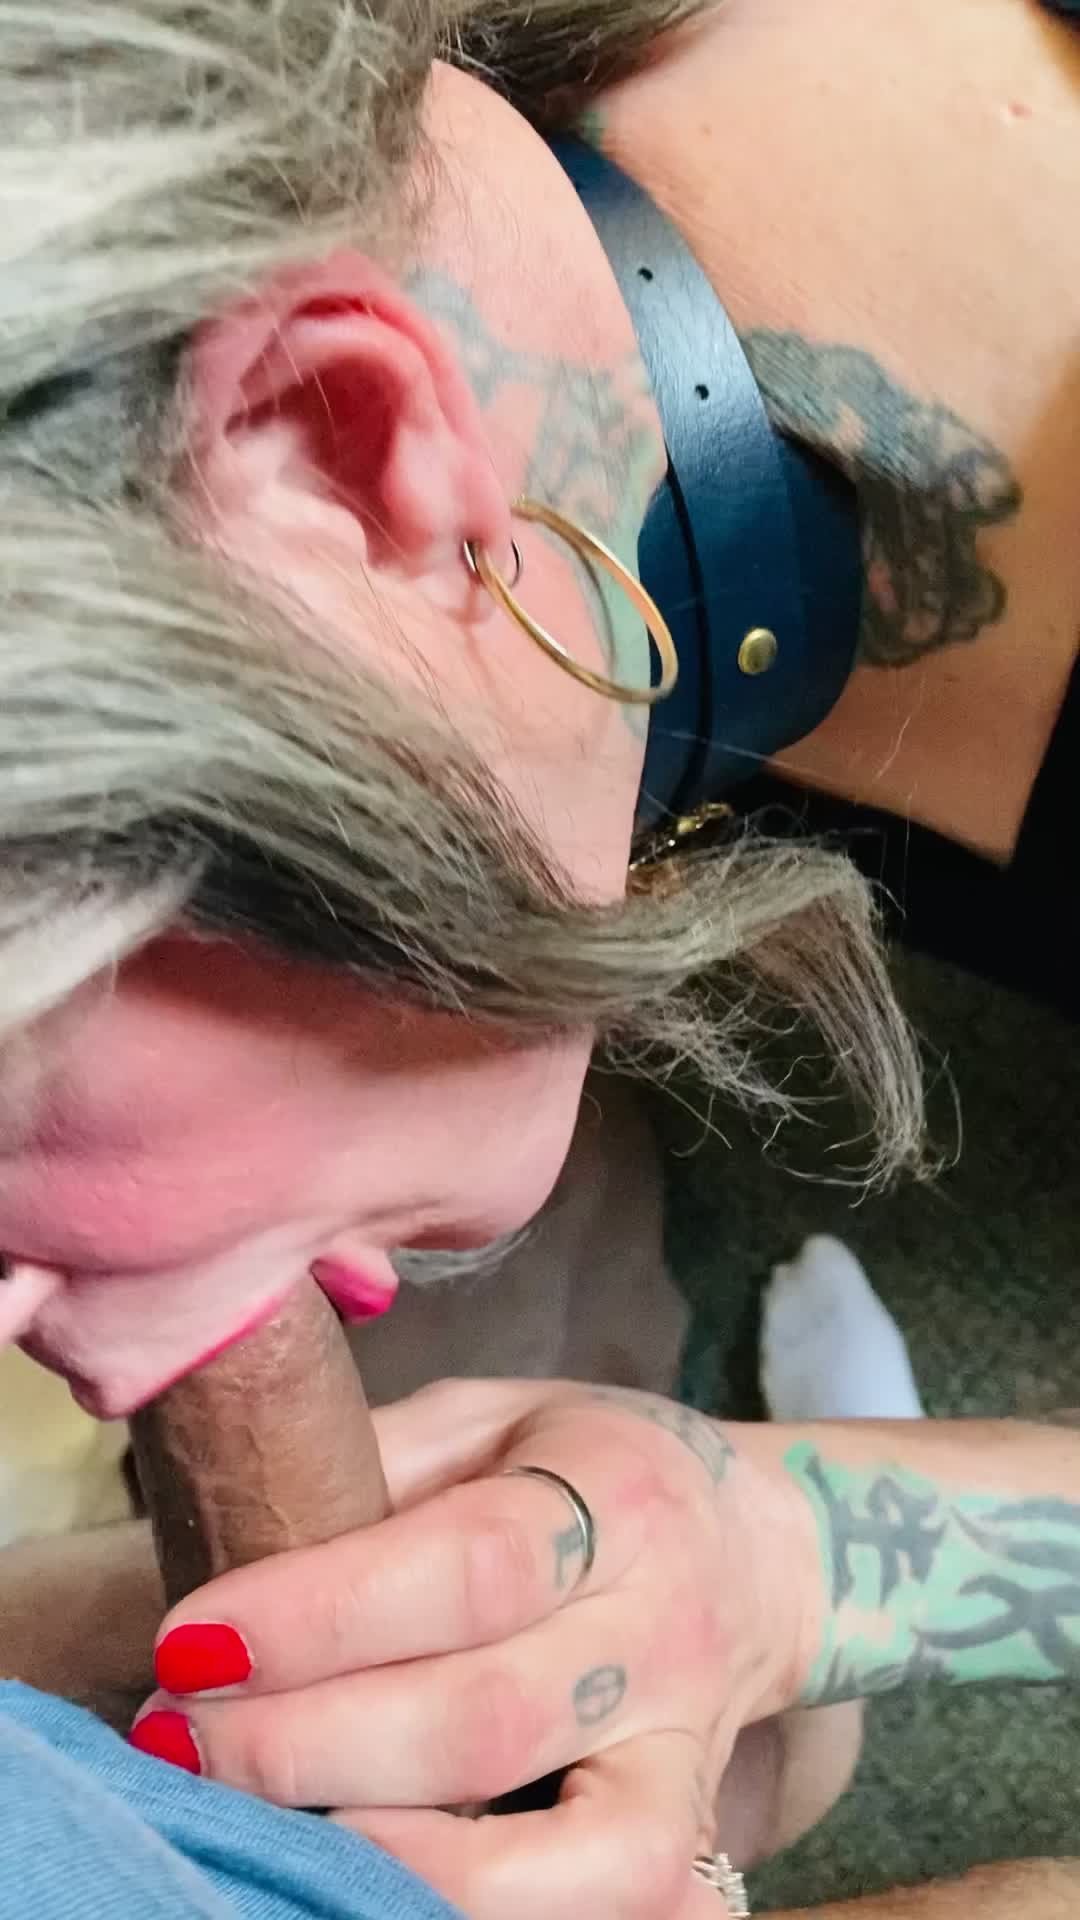 Shared Video by DangerMarcy with the username @DangerMarcy, who is a verified user,  May 22, 2024 at 5:38 AM and the text says '#bj #blowjob #cocksucker #wifebj #wifeblowjob #blowie #amateurblowjob #gfblowjob #oral #milfbj
#milfblowjob #milf #girlfriendblowjob
#cocklicker #licker #lick #suck #cum #spunk #wank #handjob #foreplay'